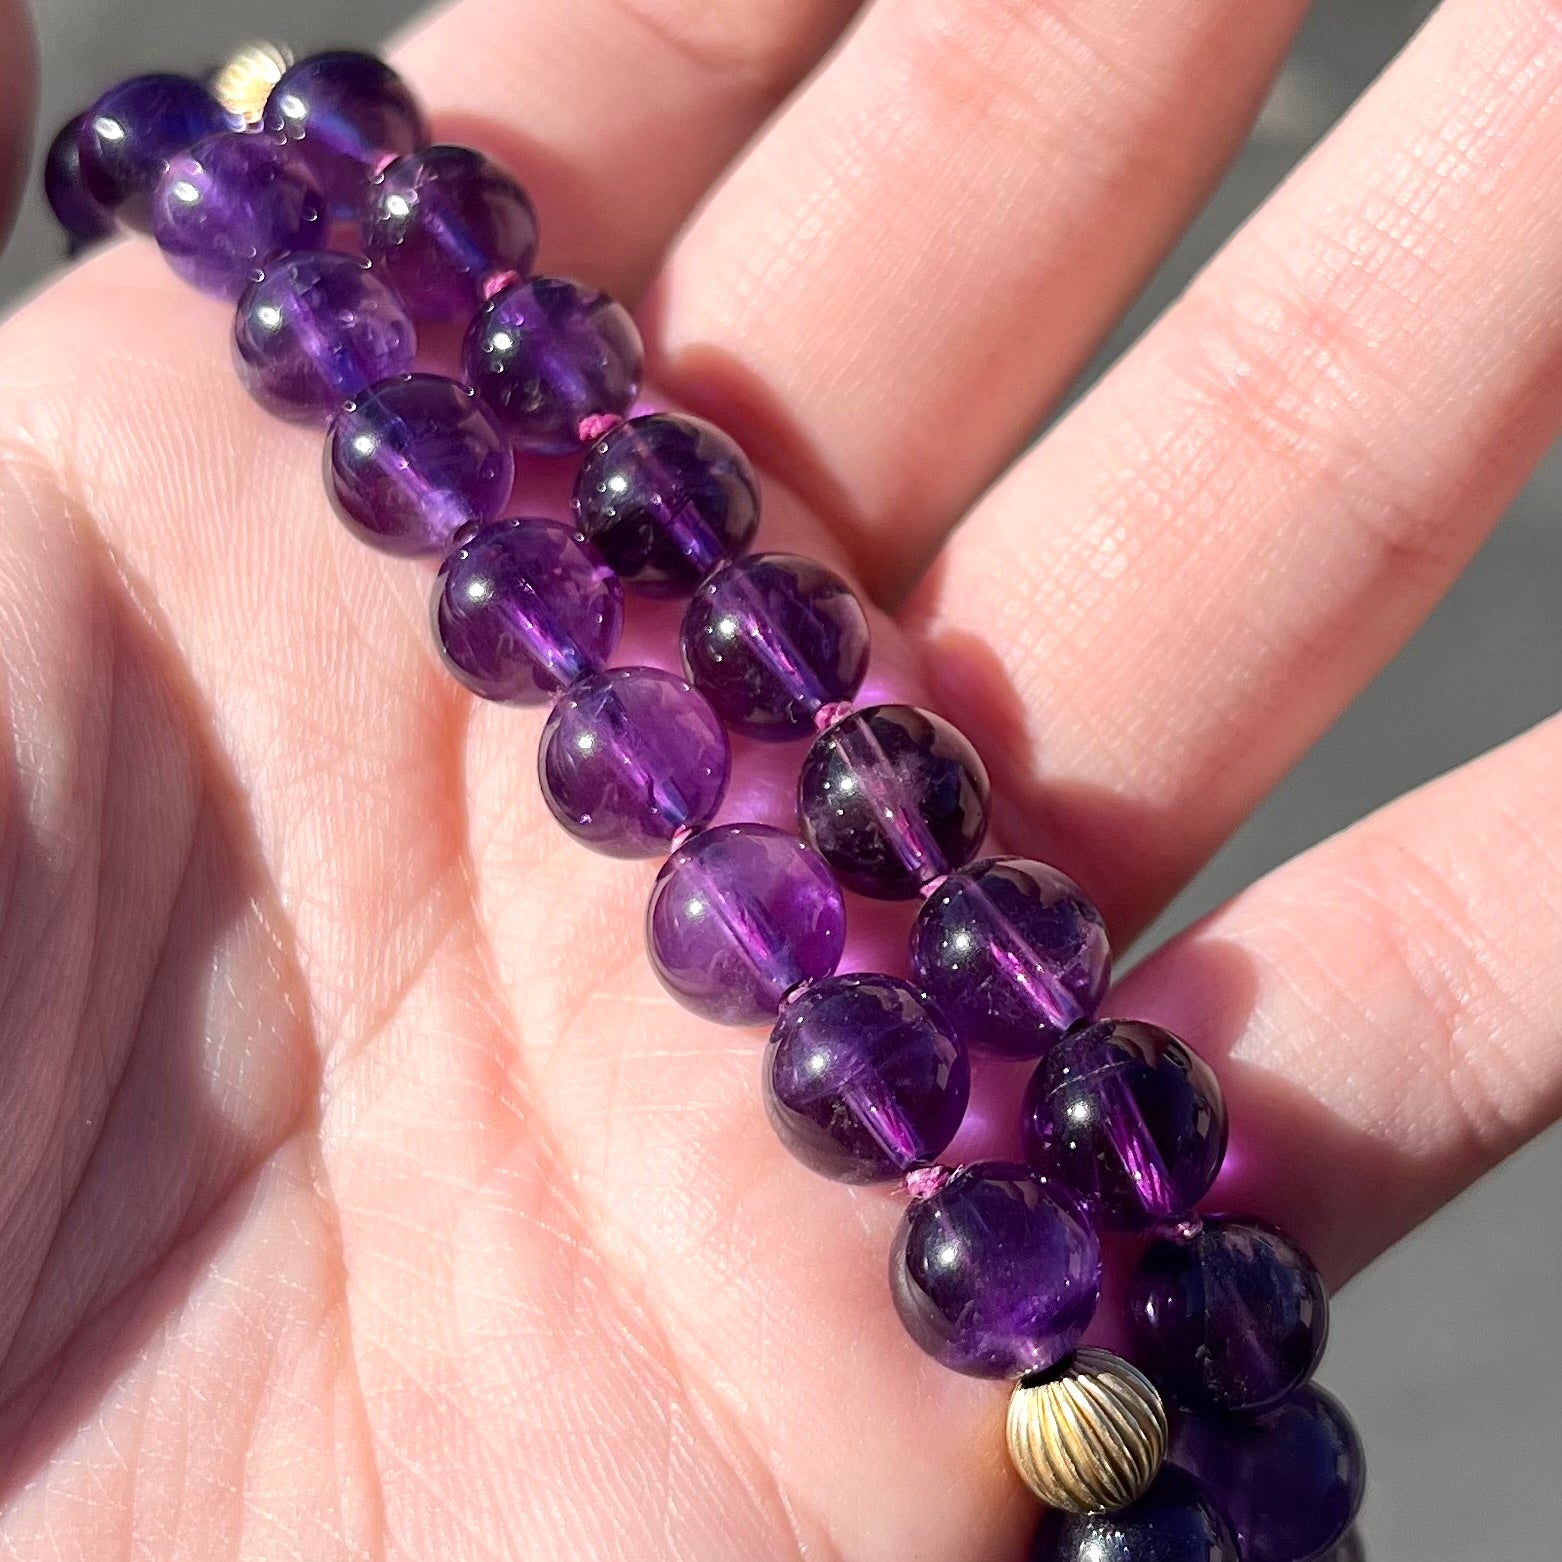 A beaded necklace made with round amethyst and 14k yellow gold beads.